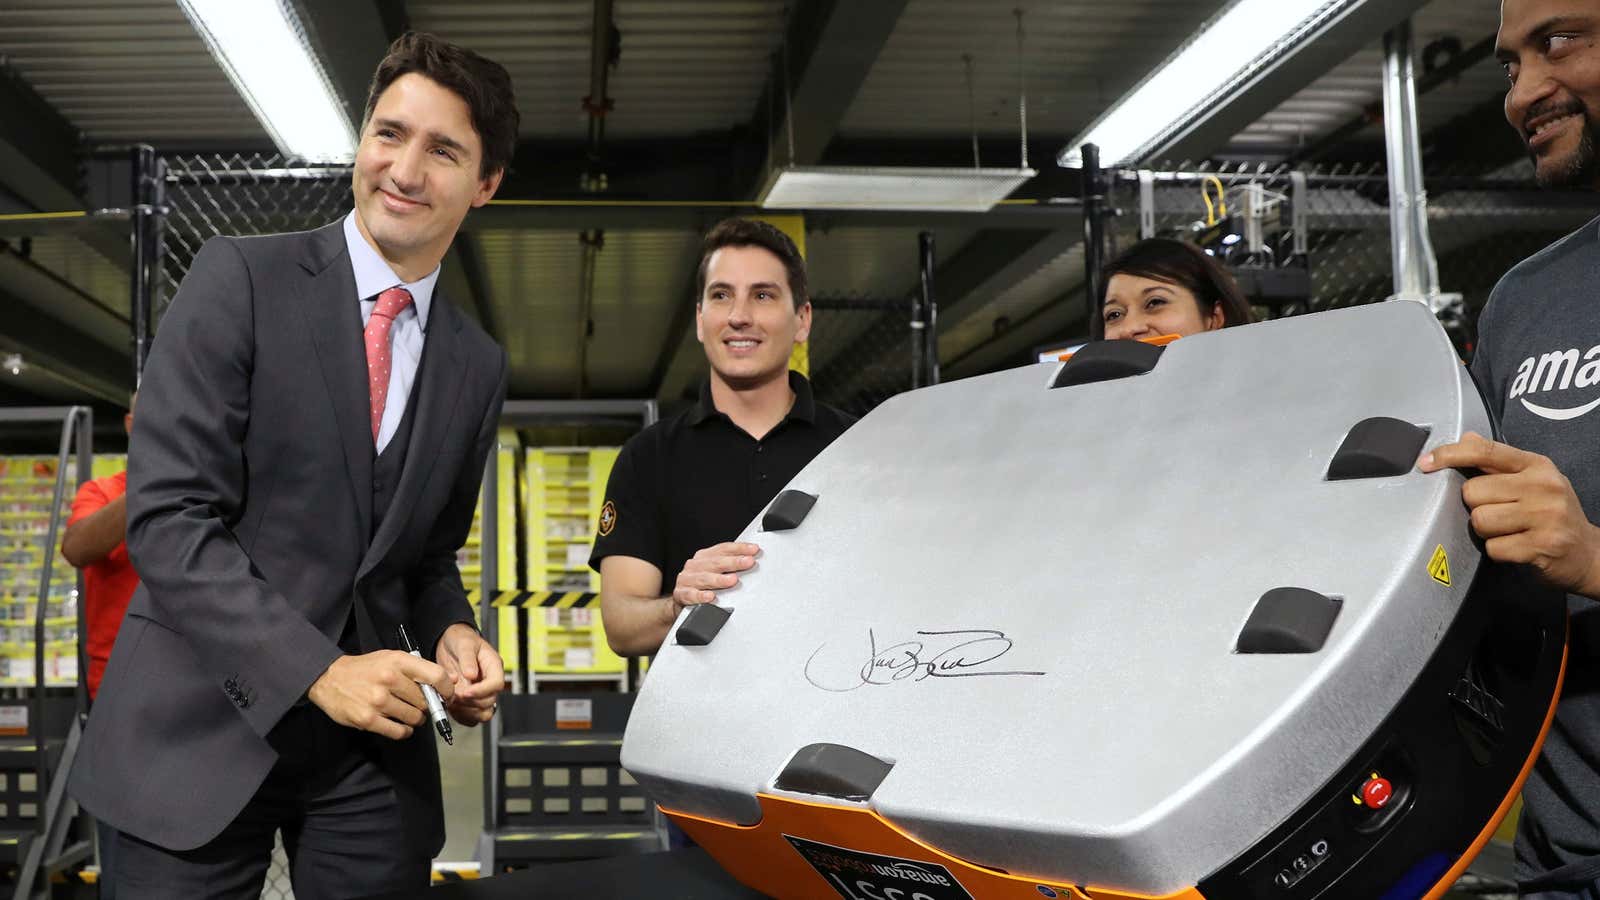 Canada’s Prime Minister Justin Trudeau signs a robotic unit during a tour of the Amazon Fulfillment Centre in Brampton, Ontario Canada, October 20, 2016.